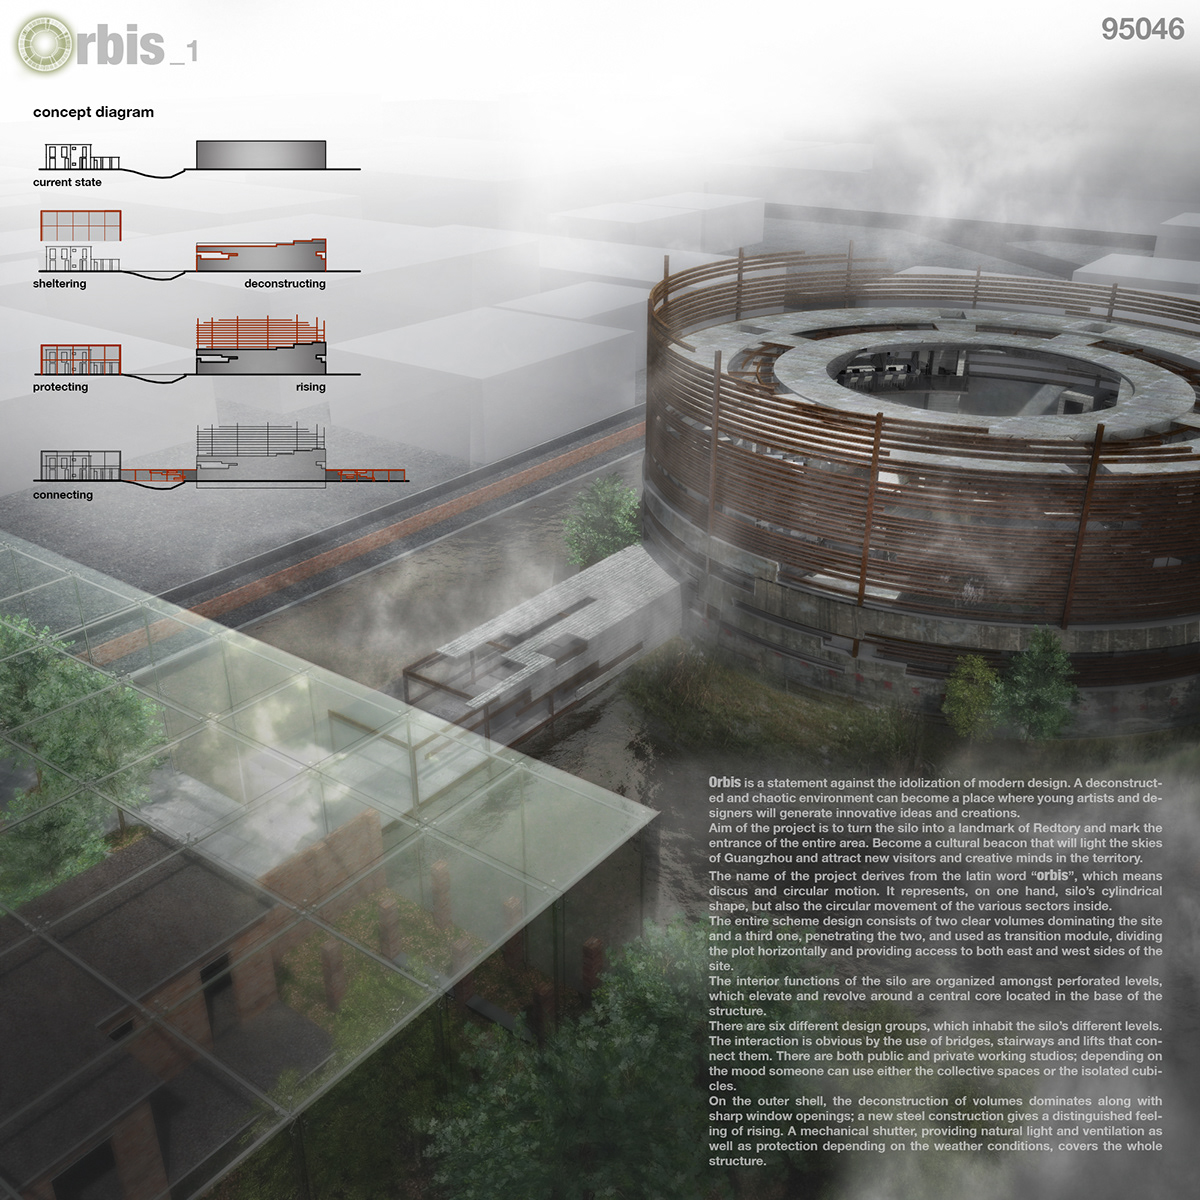 architeam o25 architects silo Competition china silo competition Orbis vandoros ALEX VANDOROS architect ArchiPaper architravel industrial 3D